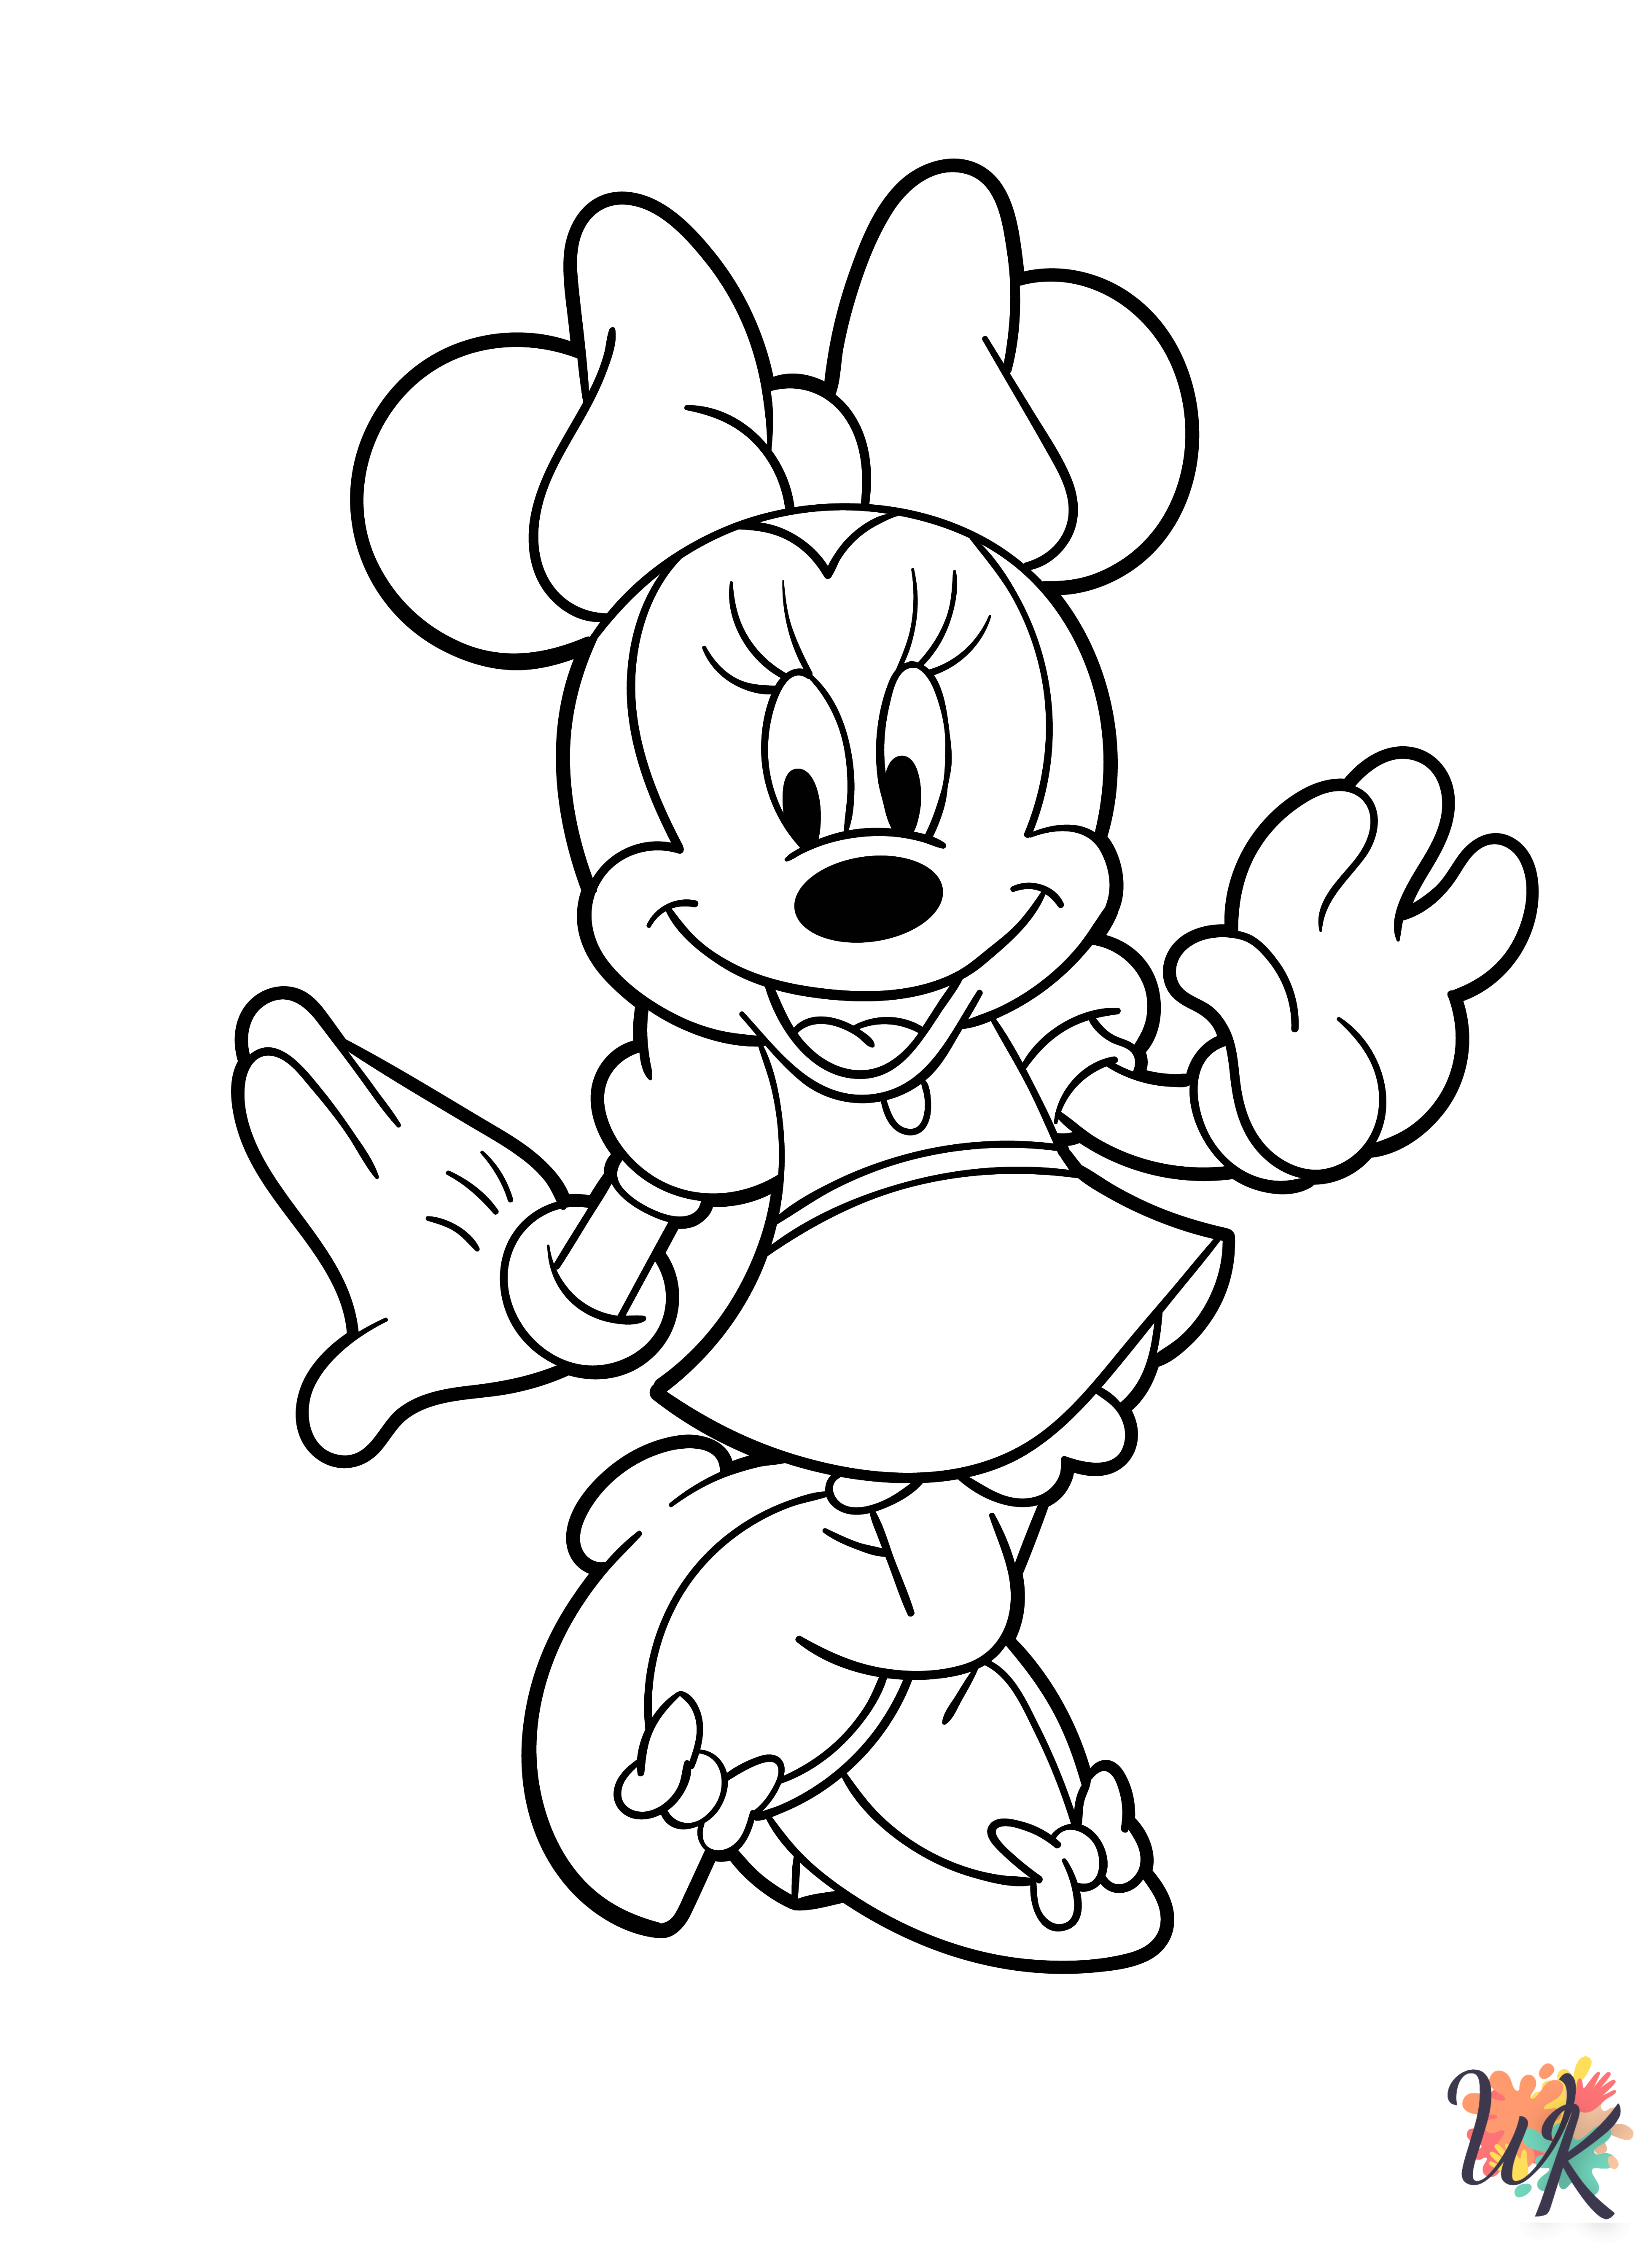 Minnie Mouse coloring pages free